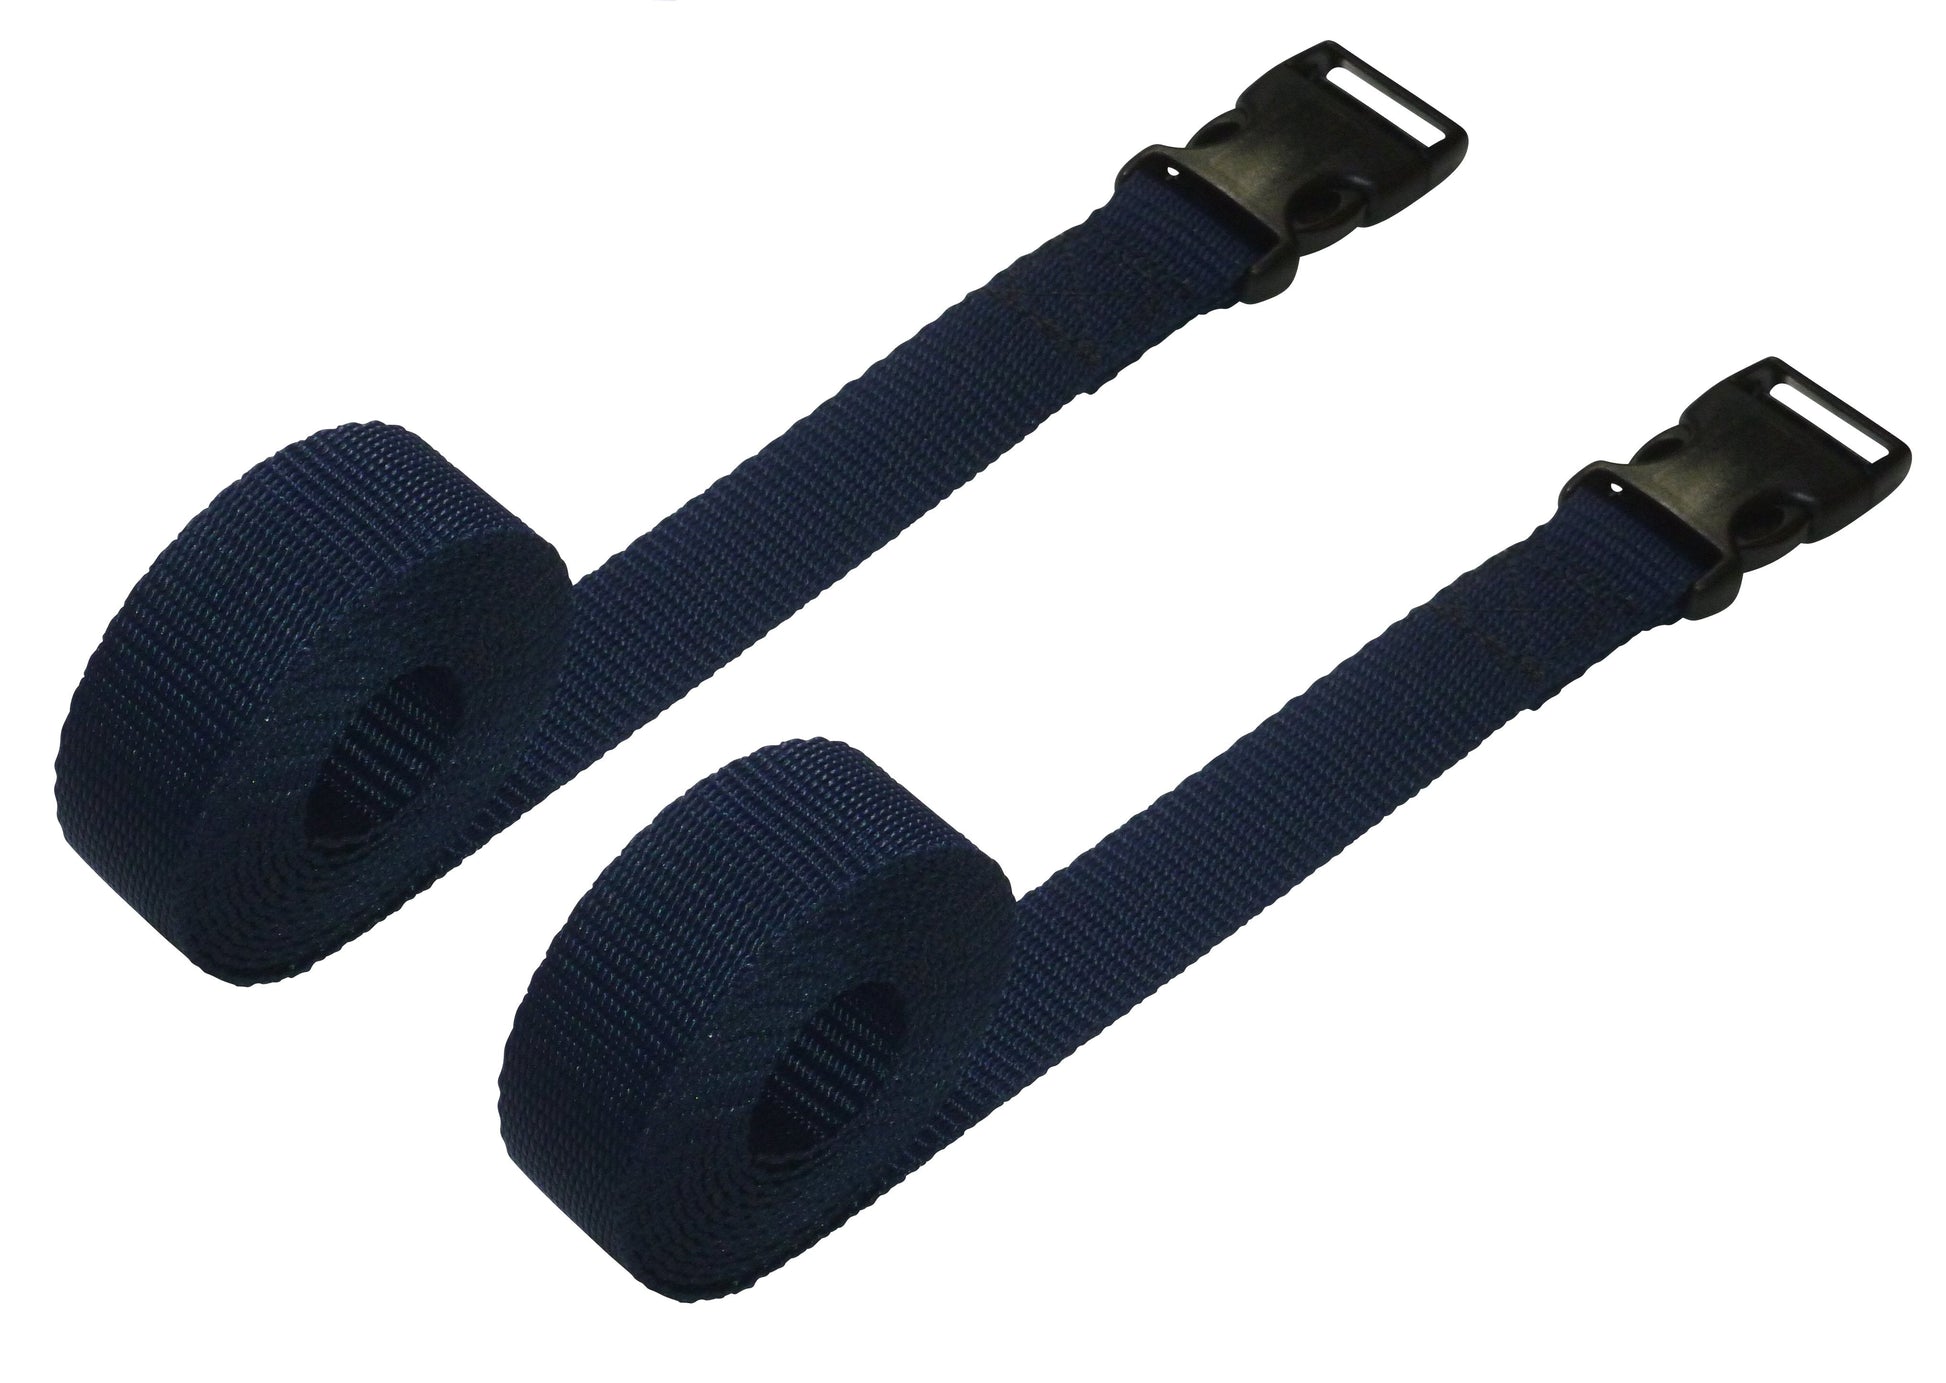 Benristraps 2 Pack Webbing Straps with Clips - Adjustable Luggage Straps in navy blue